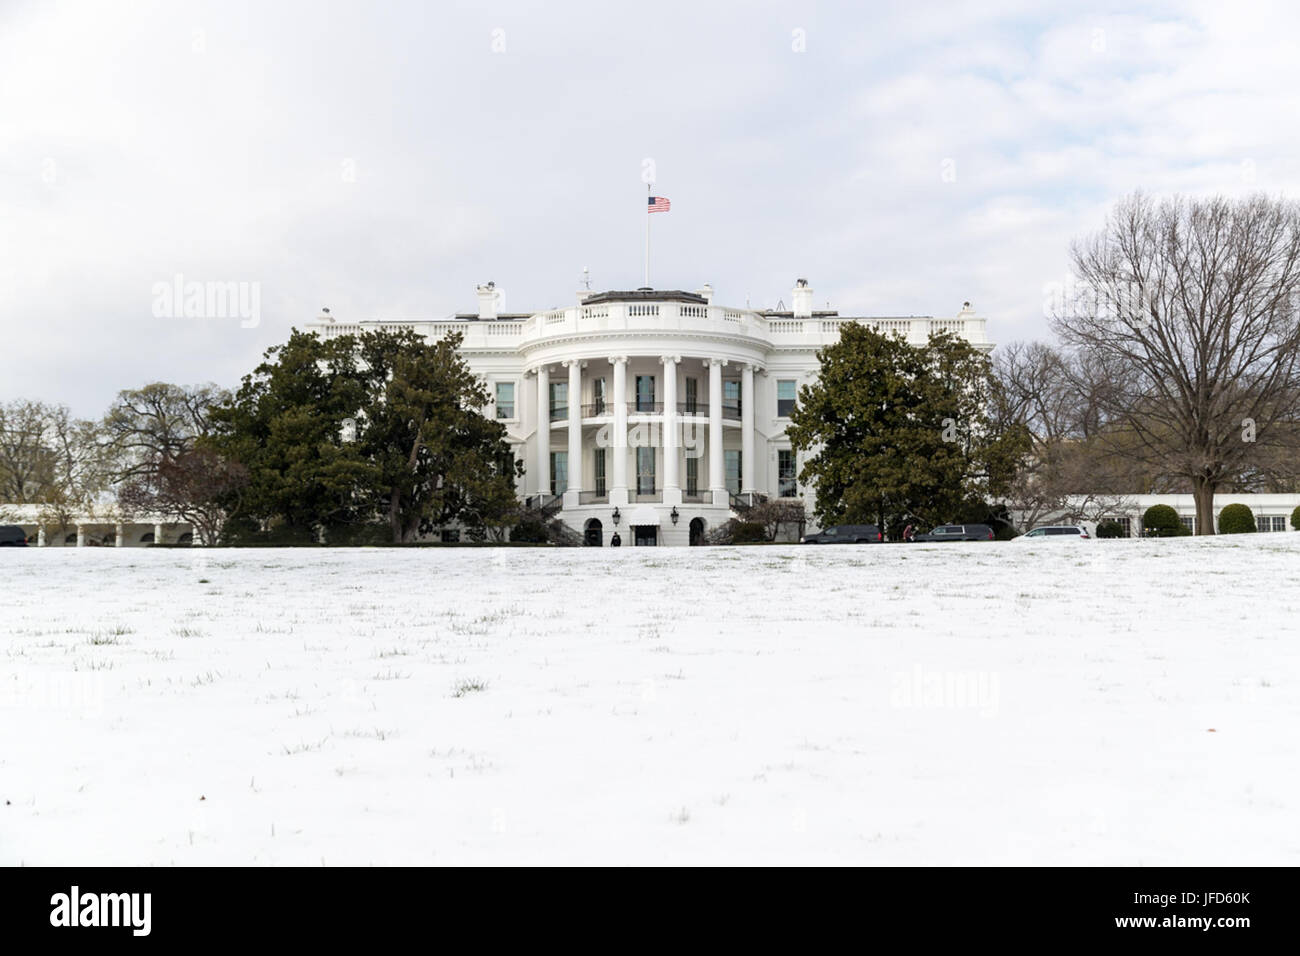 The White House's 18 acres of grounds covered in snow. (Official White House Photo by Shealah Craighead) Stock Photo